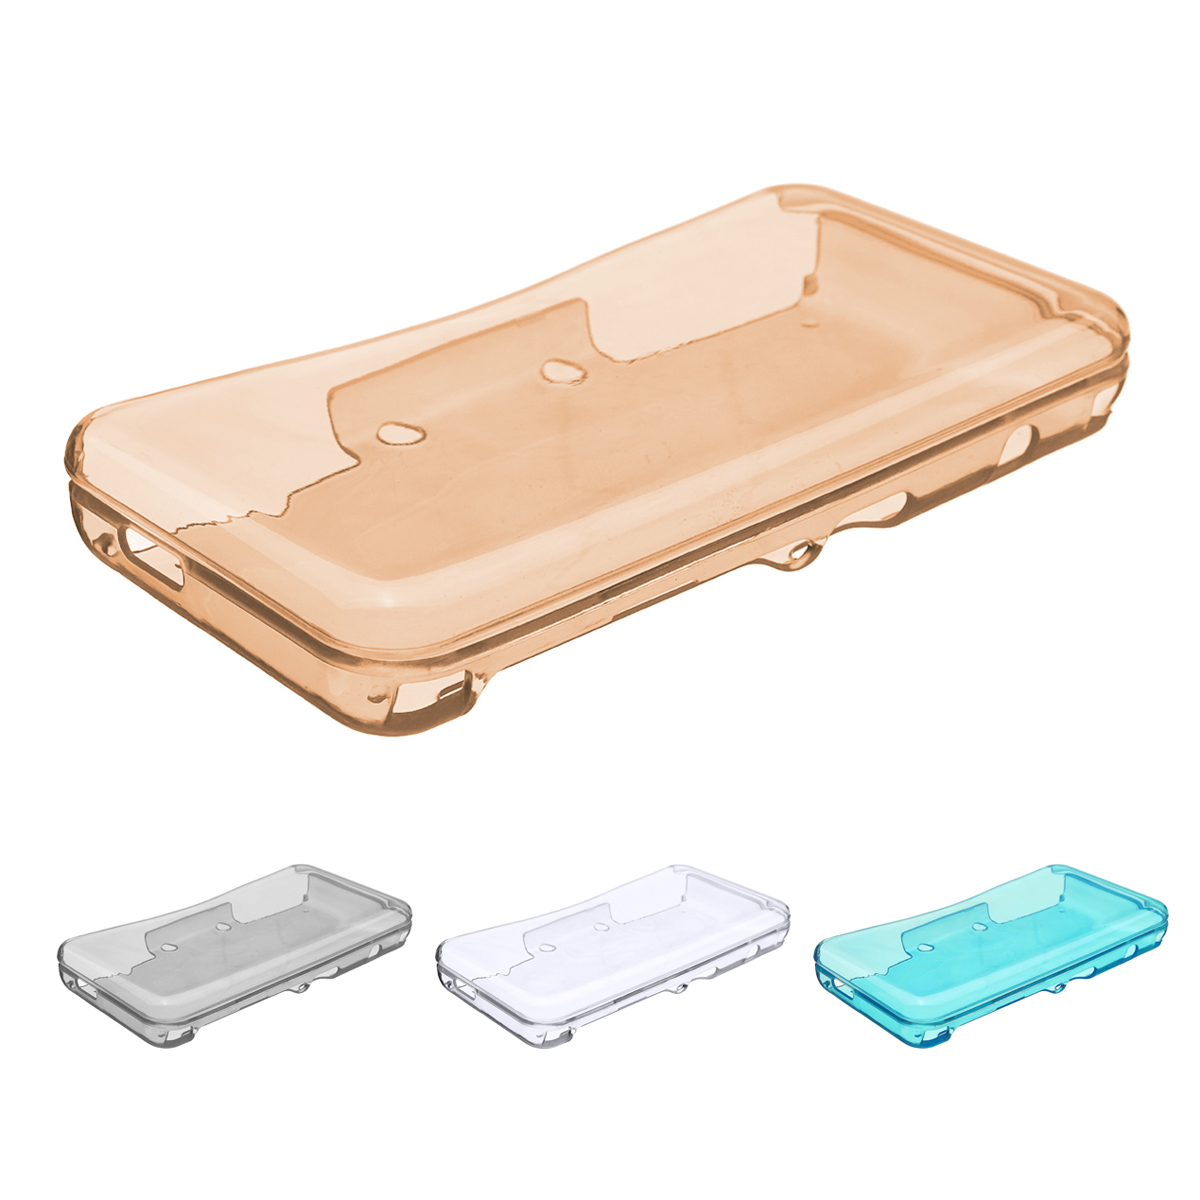 TPU Protective Case Holder Cover Skin Protector For Nintendo New 2DS XL/LL 13